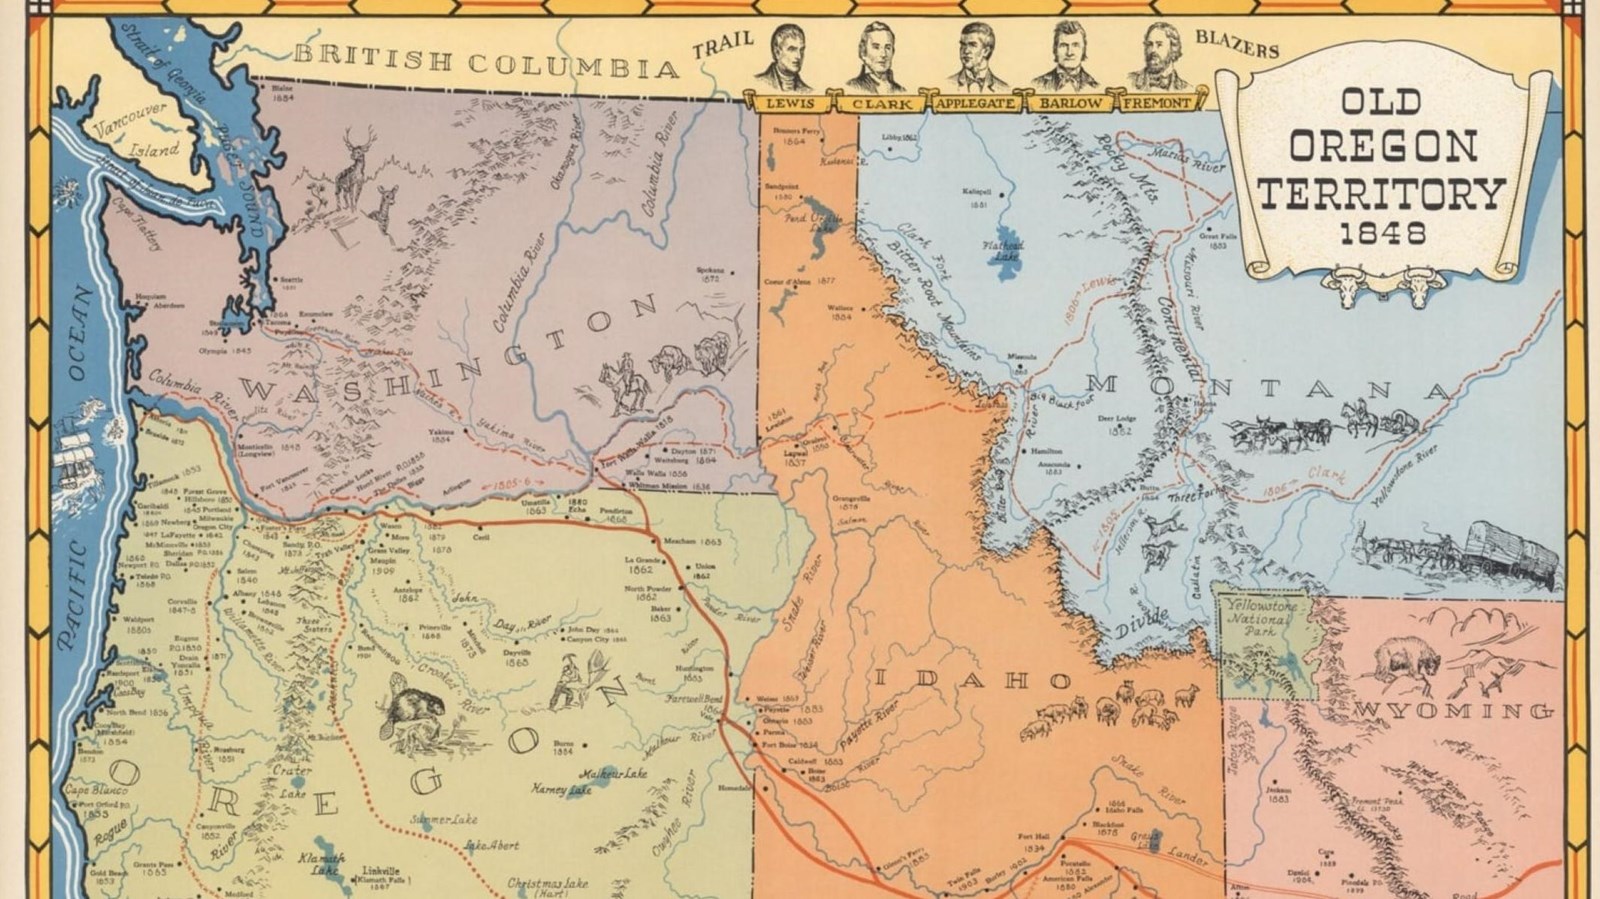 Colorful map of the oregon territory showing the settlement routes and settler trails